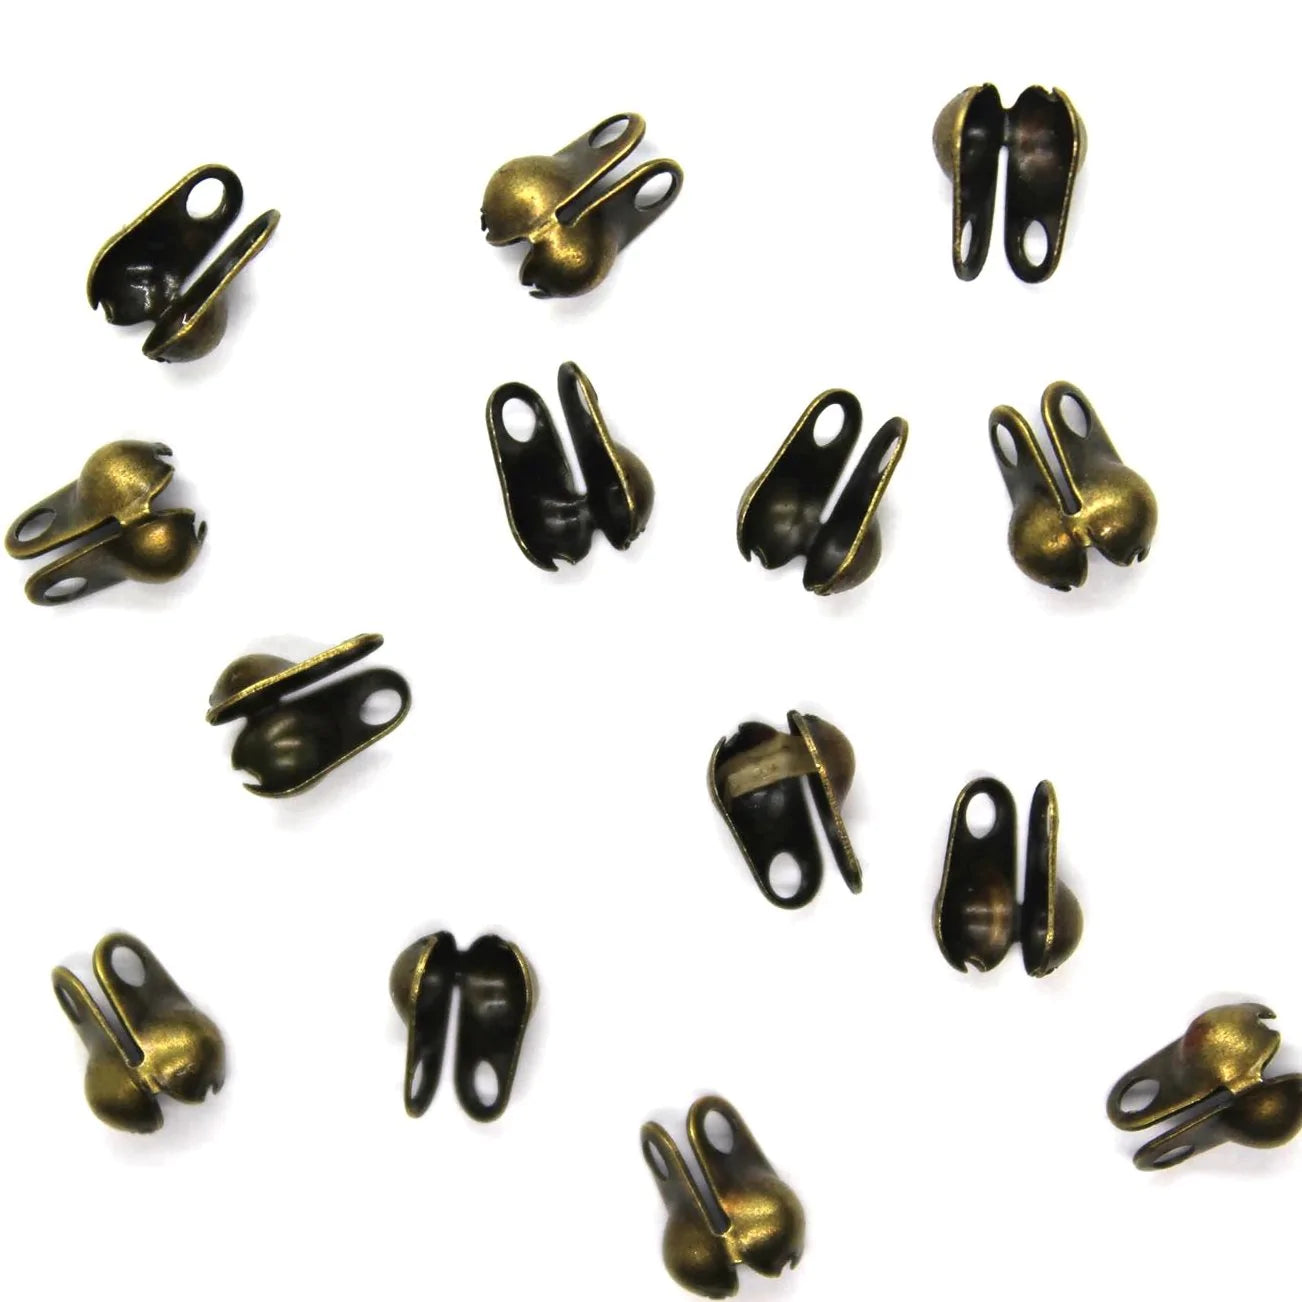 Clamshell Beads Tips, Brass, Alloy, 6mm x 5mm, Sold Per pkg of 80